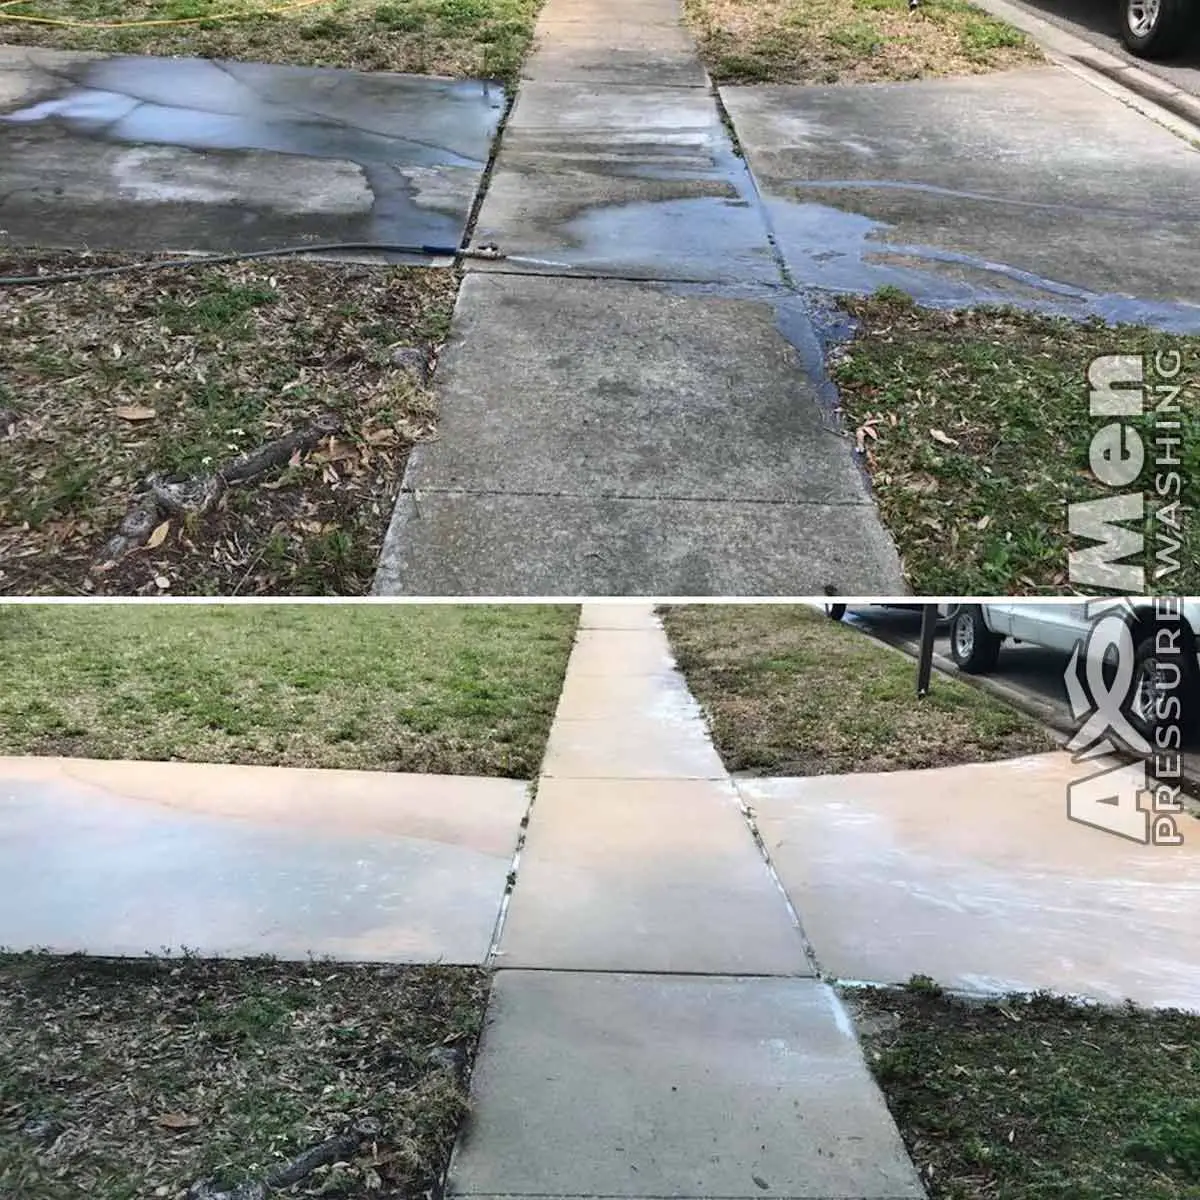 How To Clean Mold Off Concrete Driveway